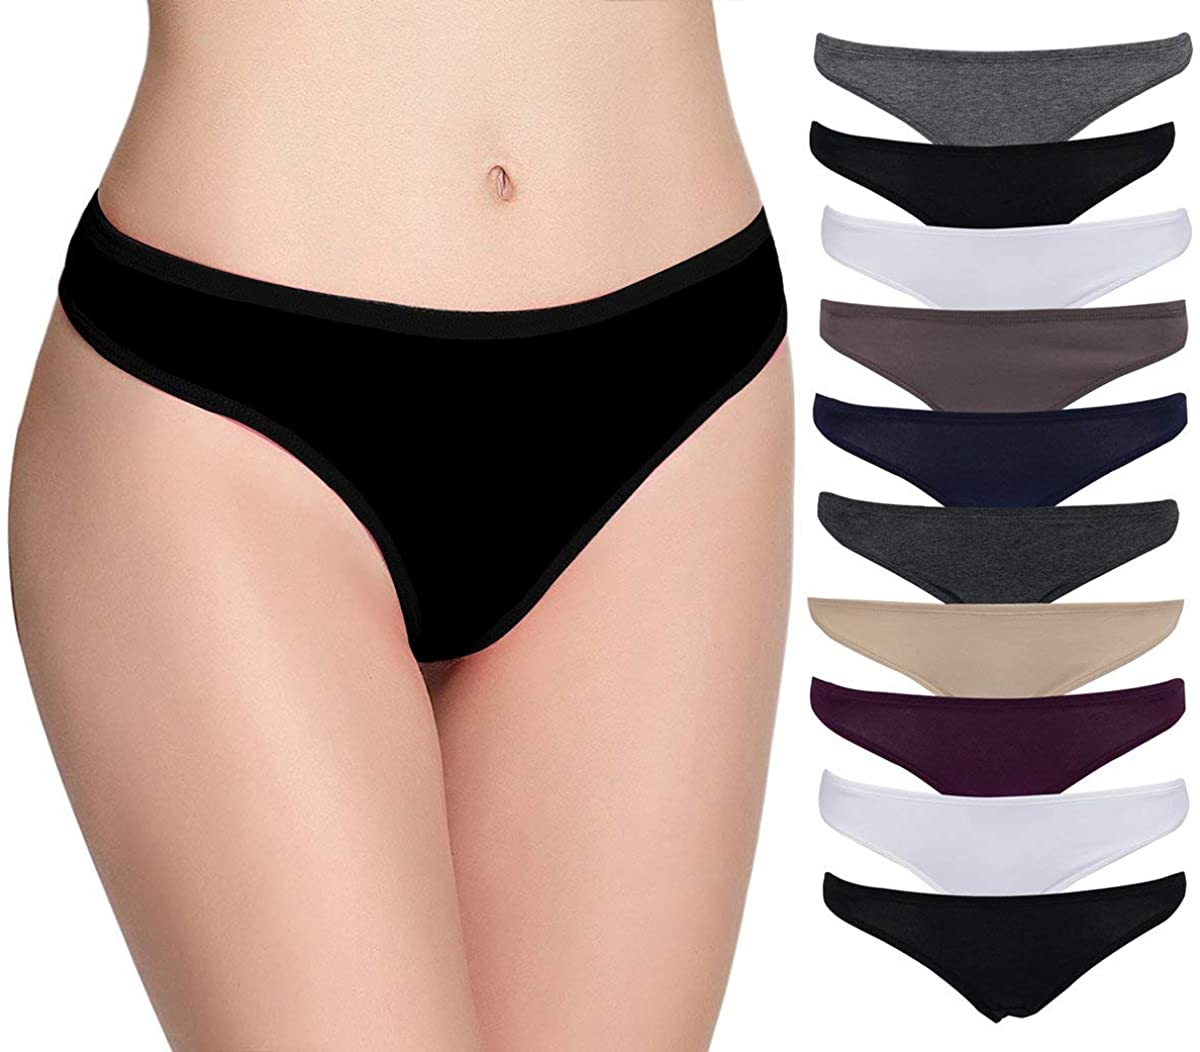 Emprella Womens Underwear Thong Panties - 10 Pack Colors and Patterns May  Vary - Helia Beer Co